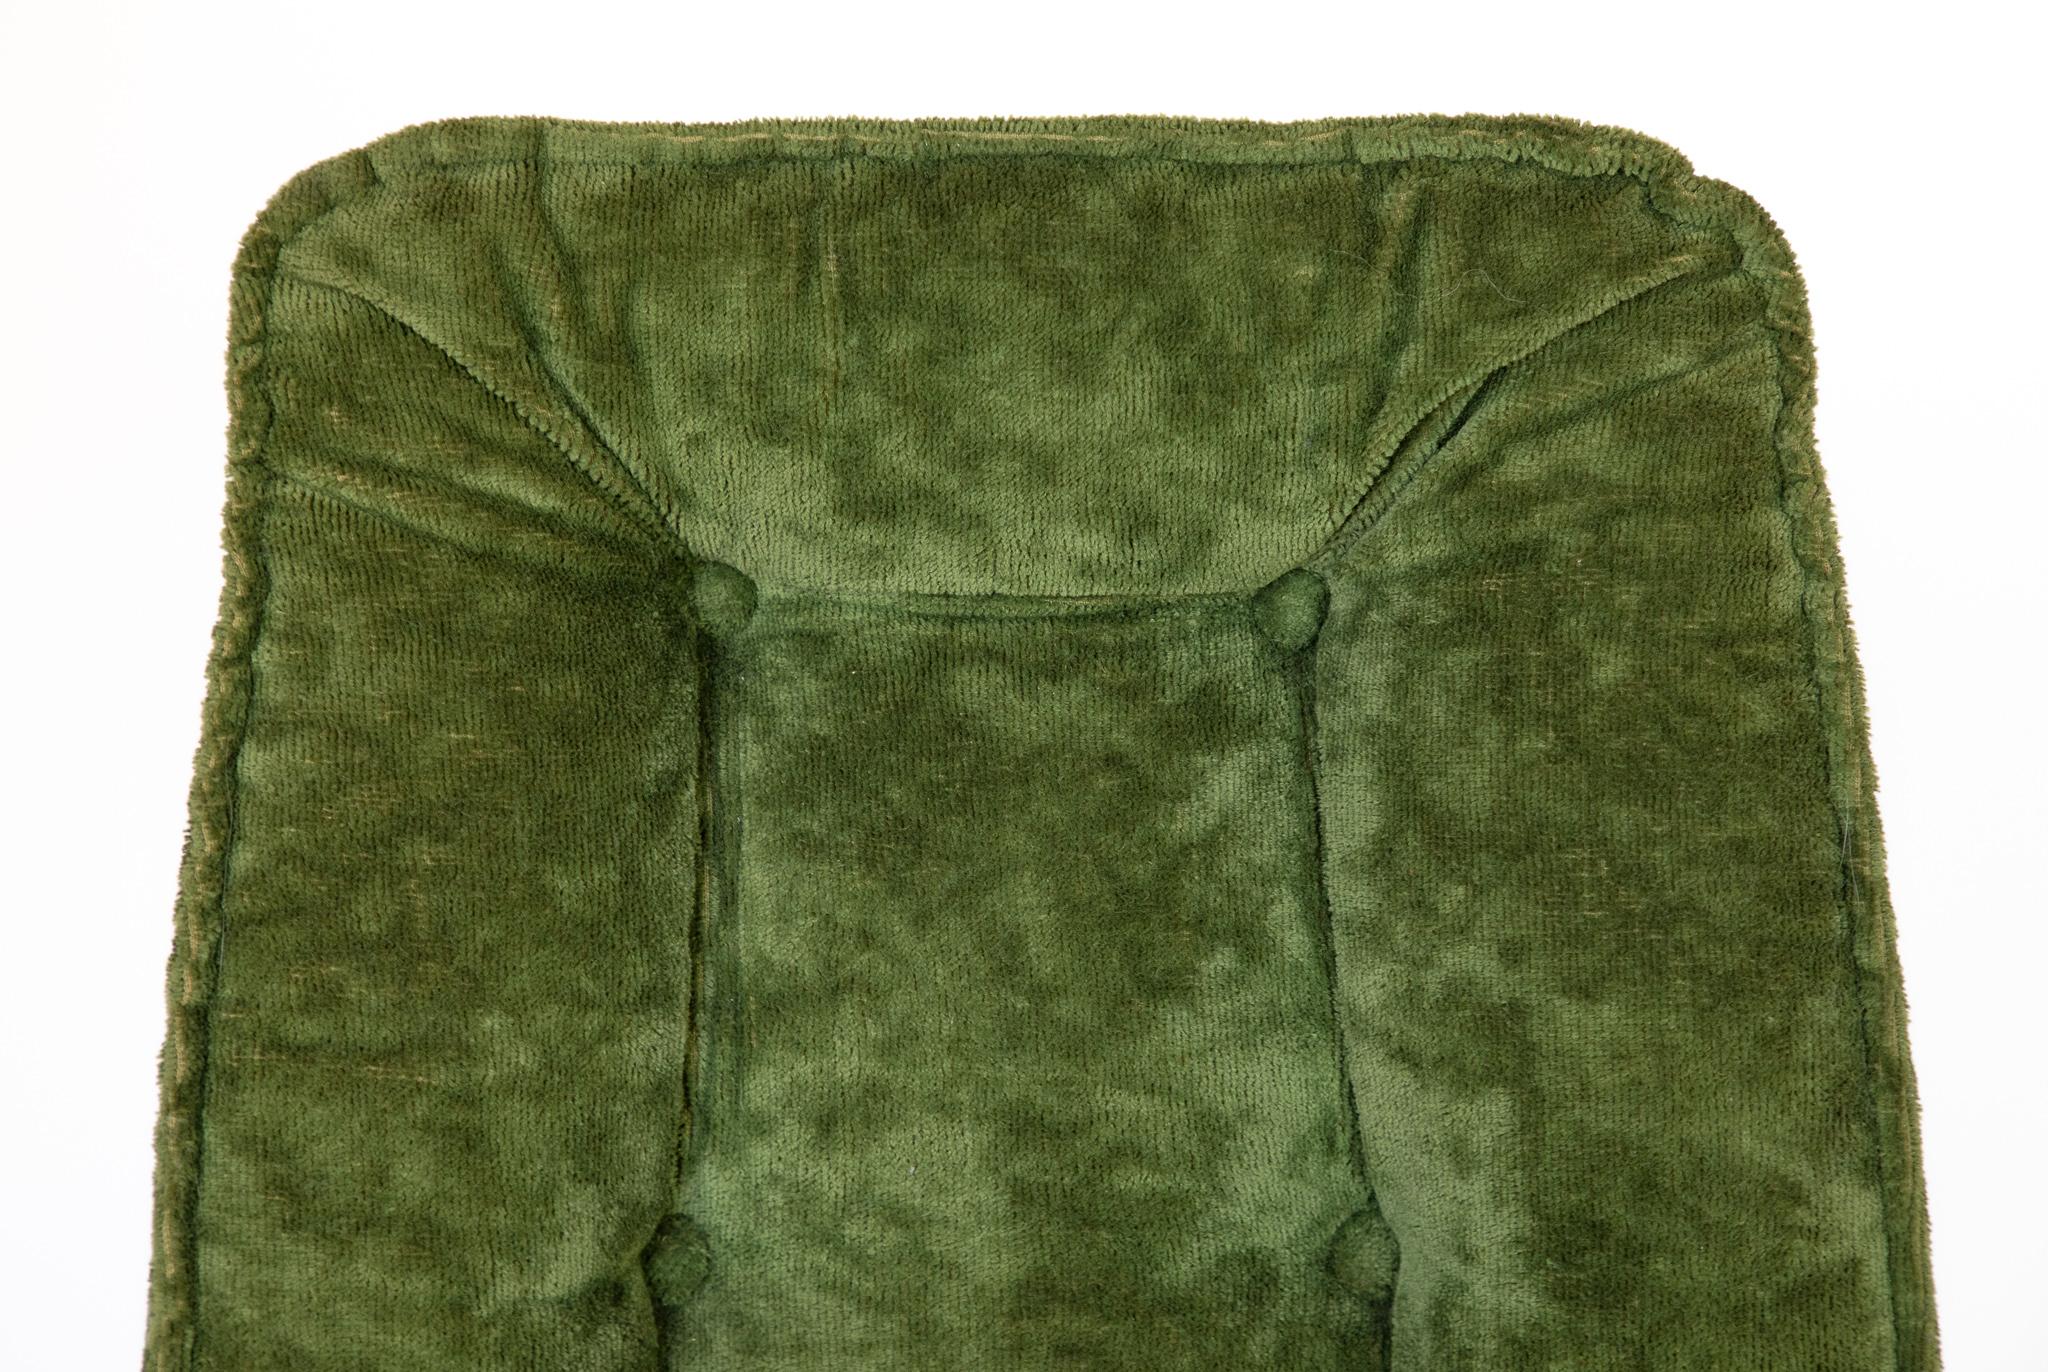 Mid Century Modern Dining Chairs in Green Velvet Upholstery, Italy, 1970s For Sale 1